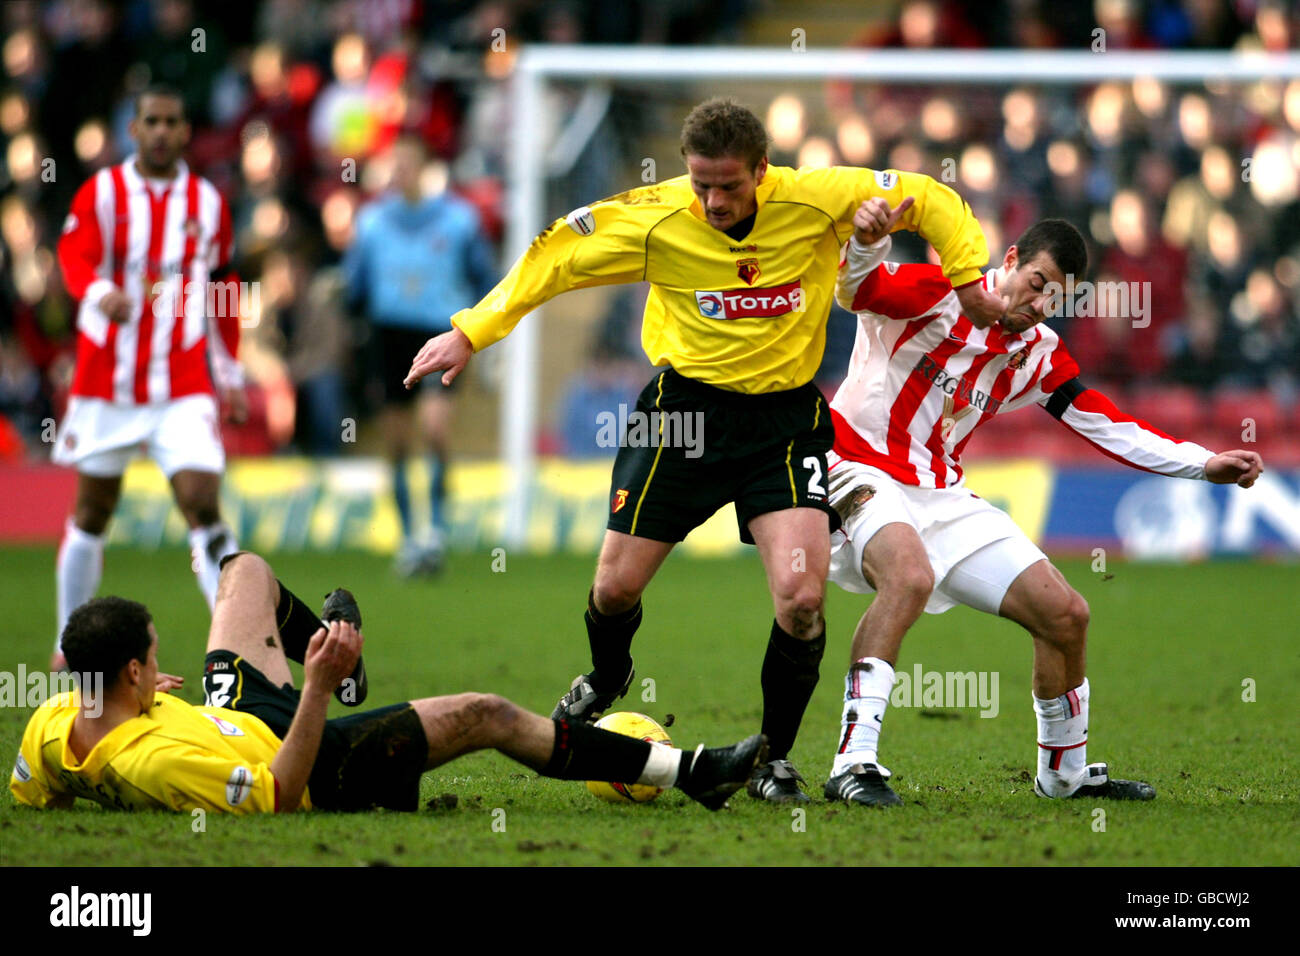 l-r Watford's Scott Fitzgerald, Neal Ardley and Sunderland's Julio Arca battle for the ball Stock Photo